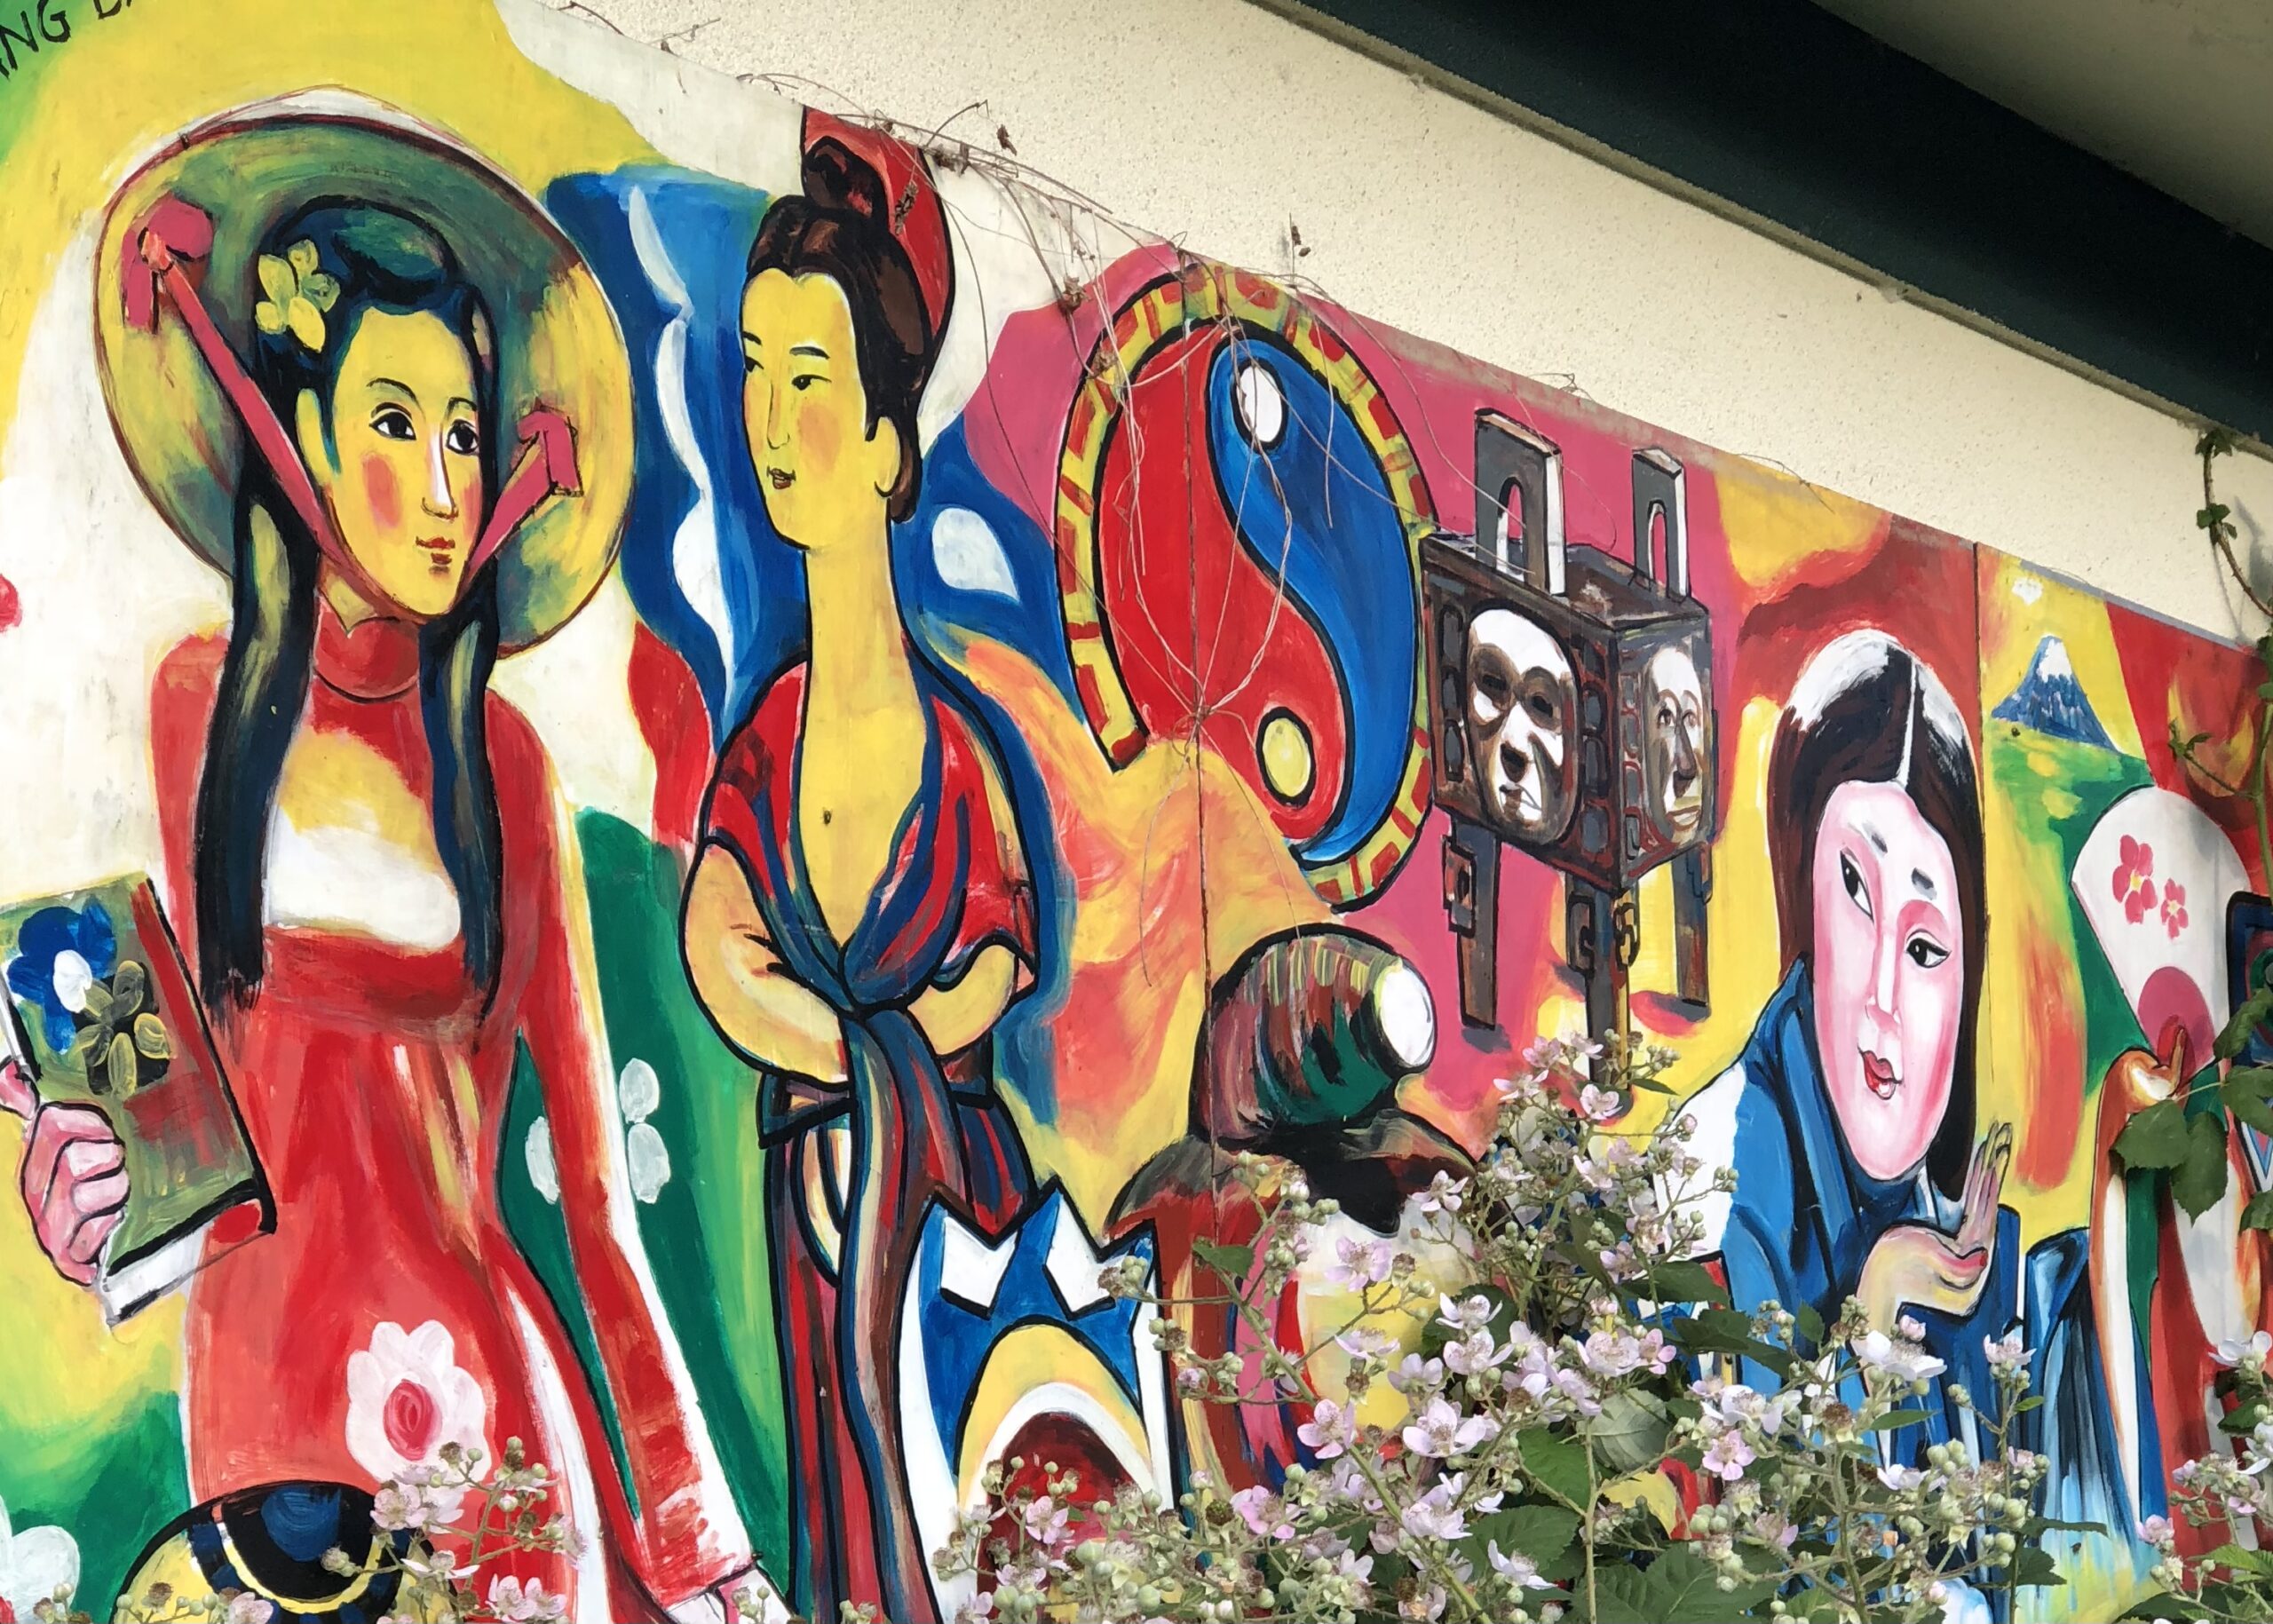 A mural the author took at the now defunct Hong Kong Seafood Restaurant in Rainier Beach, Seattle WA. It depicts Asian women from various cultures, as well as characters from Asian mythology.